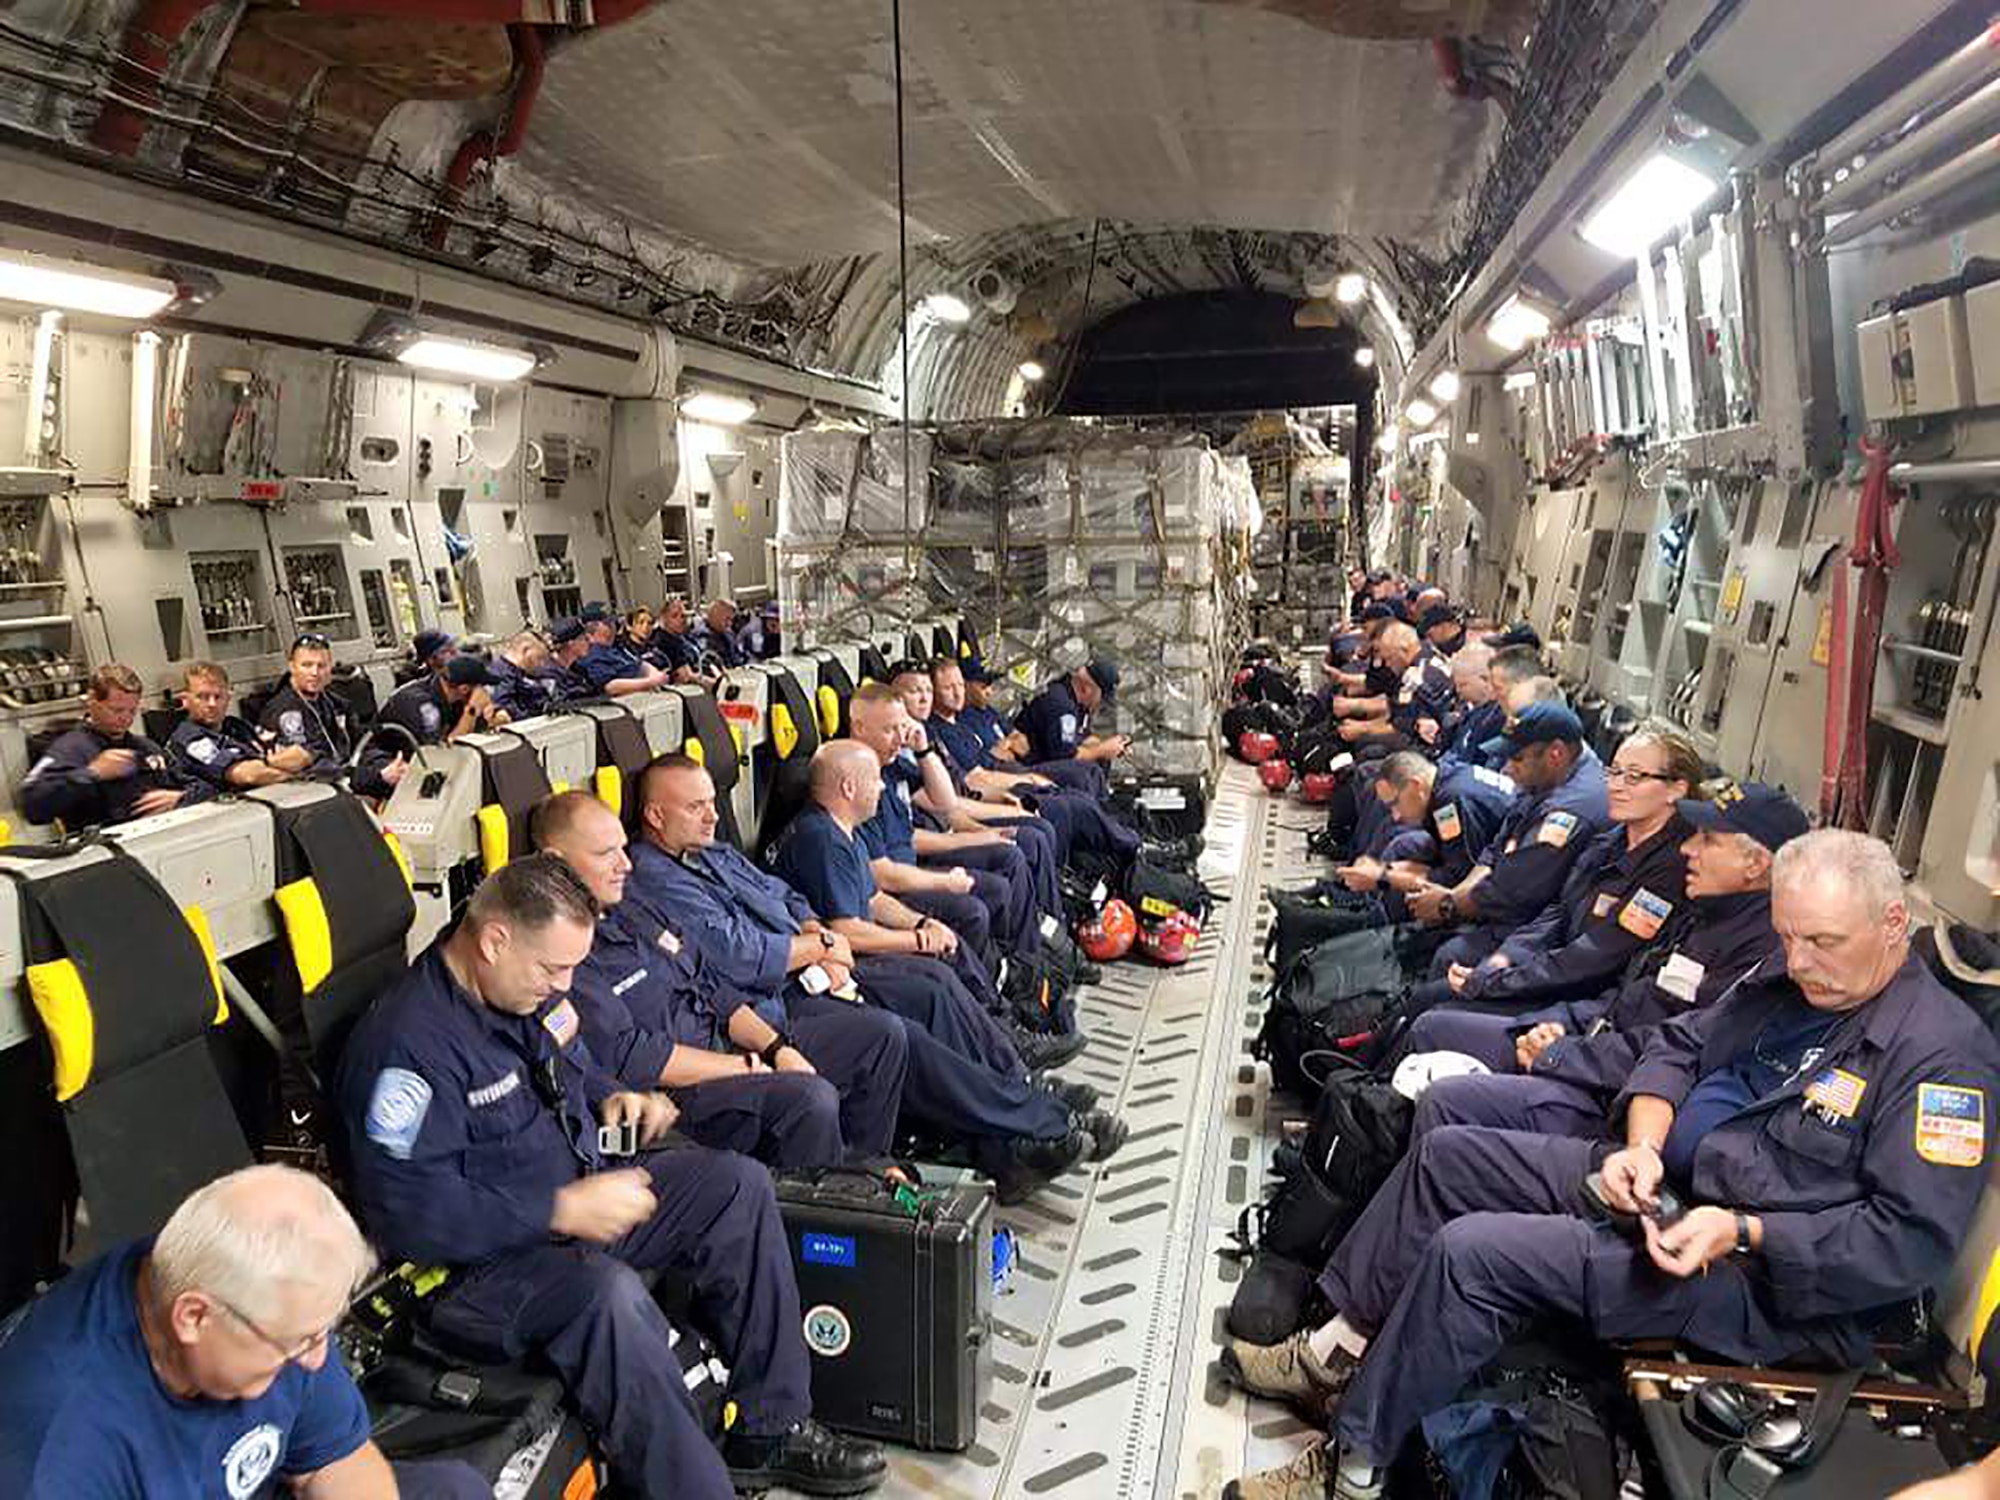 Members of the New York Task Force-1 prepare to board a 445th Airlift C-17 Globemaster III at Robins Air Force Base, Georgia September 8 and were bound for San Juan, Puerto Rico. The group, composed of FDNY and NYPD members trained to respond to catastrophic events, will assist those affected by Hurricane Irma. (Photo credit: NYC Emergency Management)